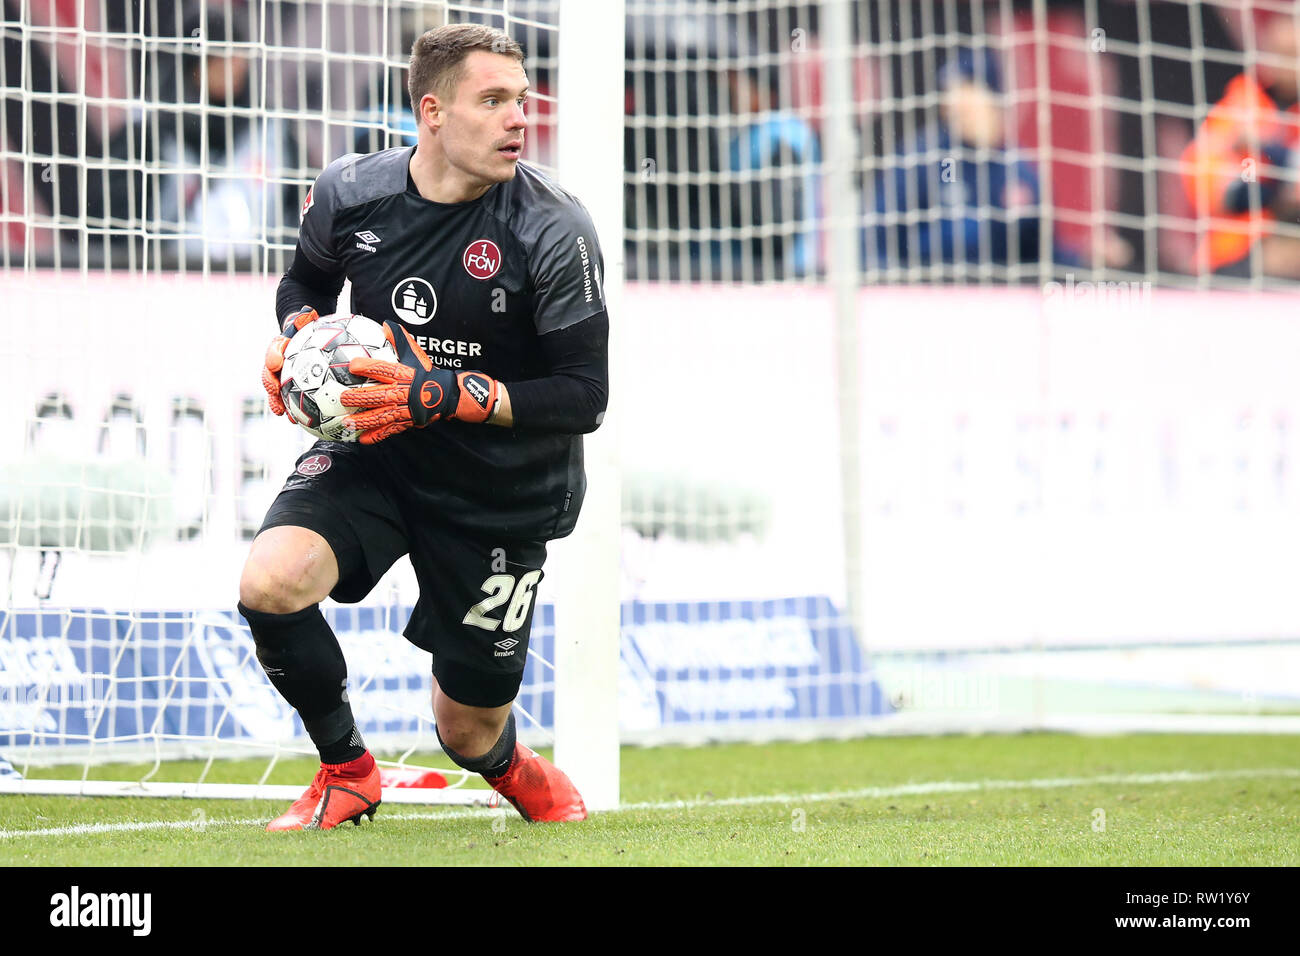 02 March 2019, Bavaria, Nürnberg: Soccer: Bundesliga, 1st FC Nuremberg - RB Leipzig, 24th matchday in Max Morlock Stadium. Nuremberg goalkeeper Christian Mathenia in action. Photo: Daniel Karmann/dpa - IMPORTANT NOTE: In accordance with the requirements of the DFL Deutsche Fußball Liga or the DFB Deutscher Fußball-Bund, it is prohibited to use or have used photographs taken in the stadium and/or the match in the form of sequence images and/or video-like photo sequences. Stock Photo